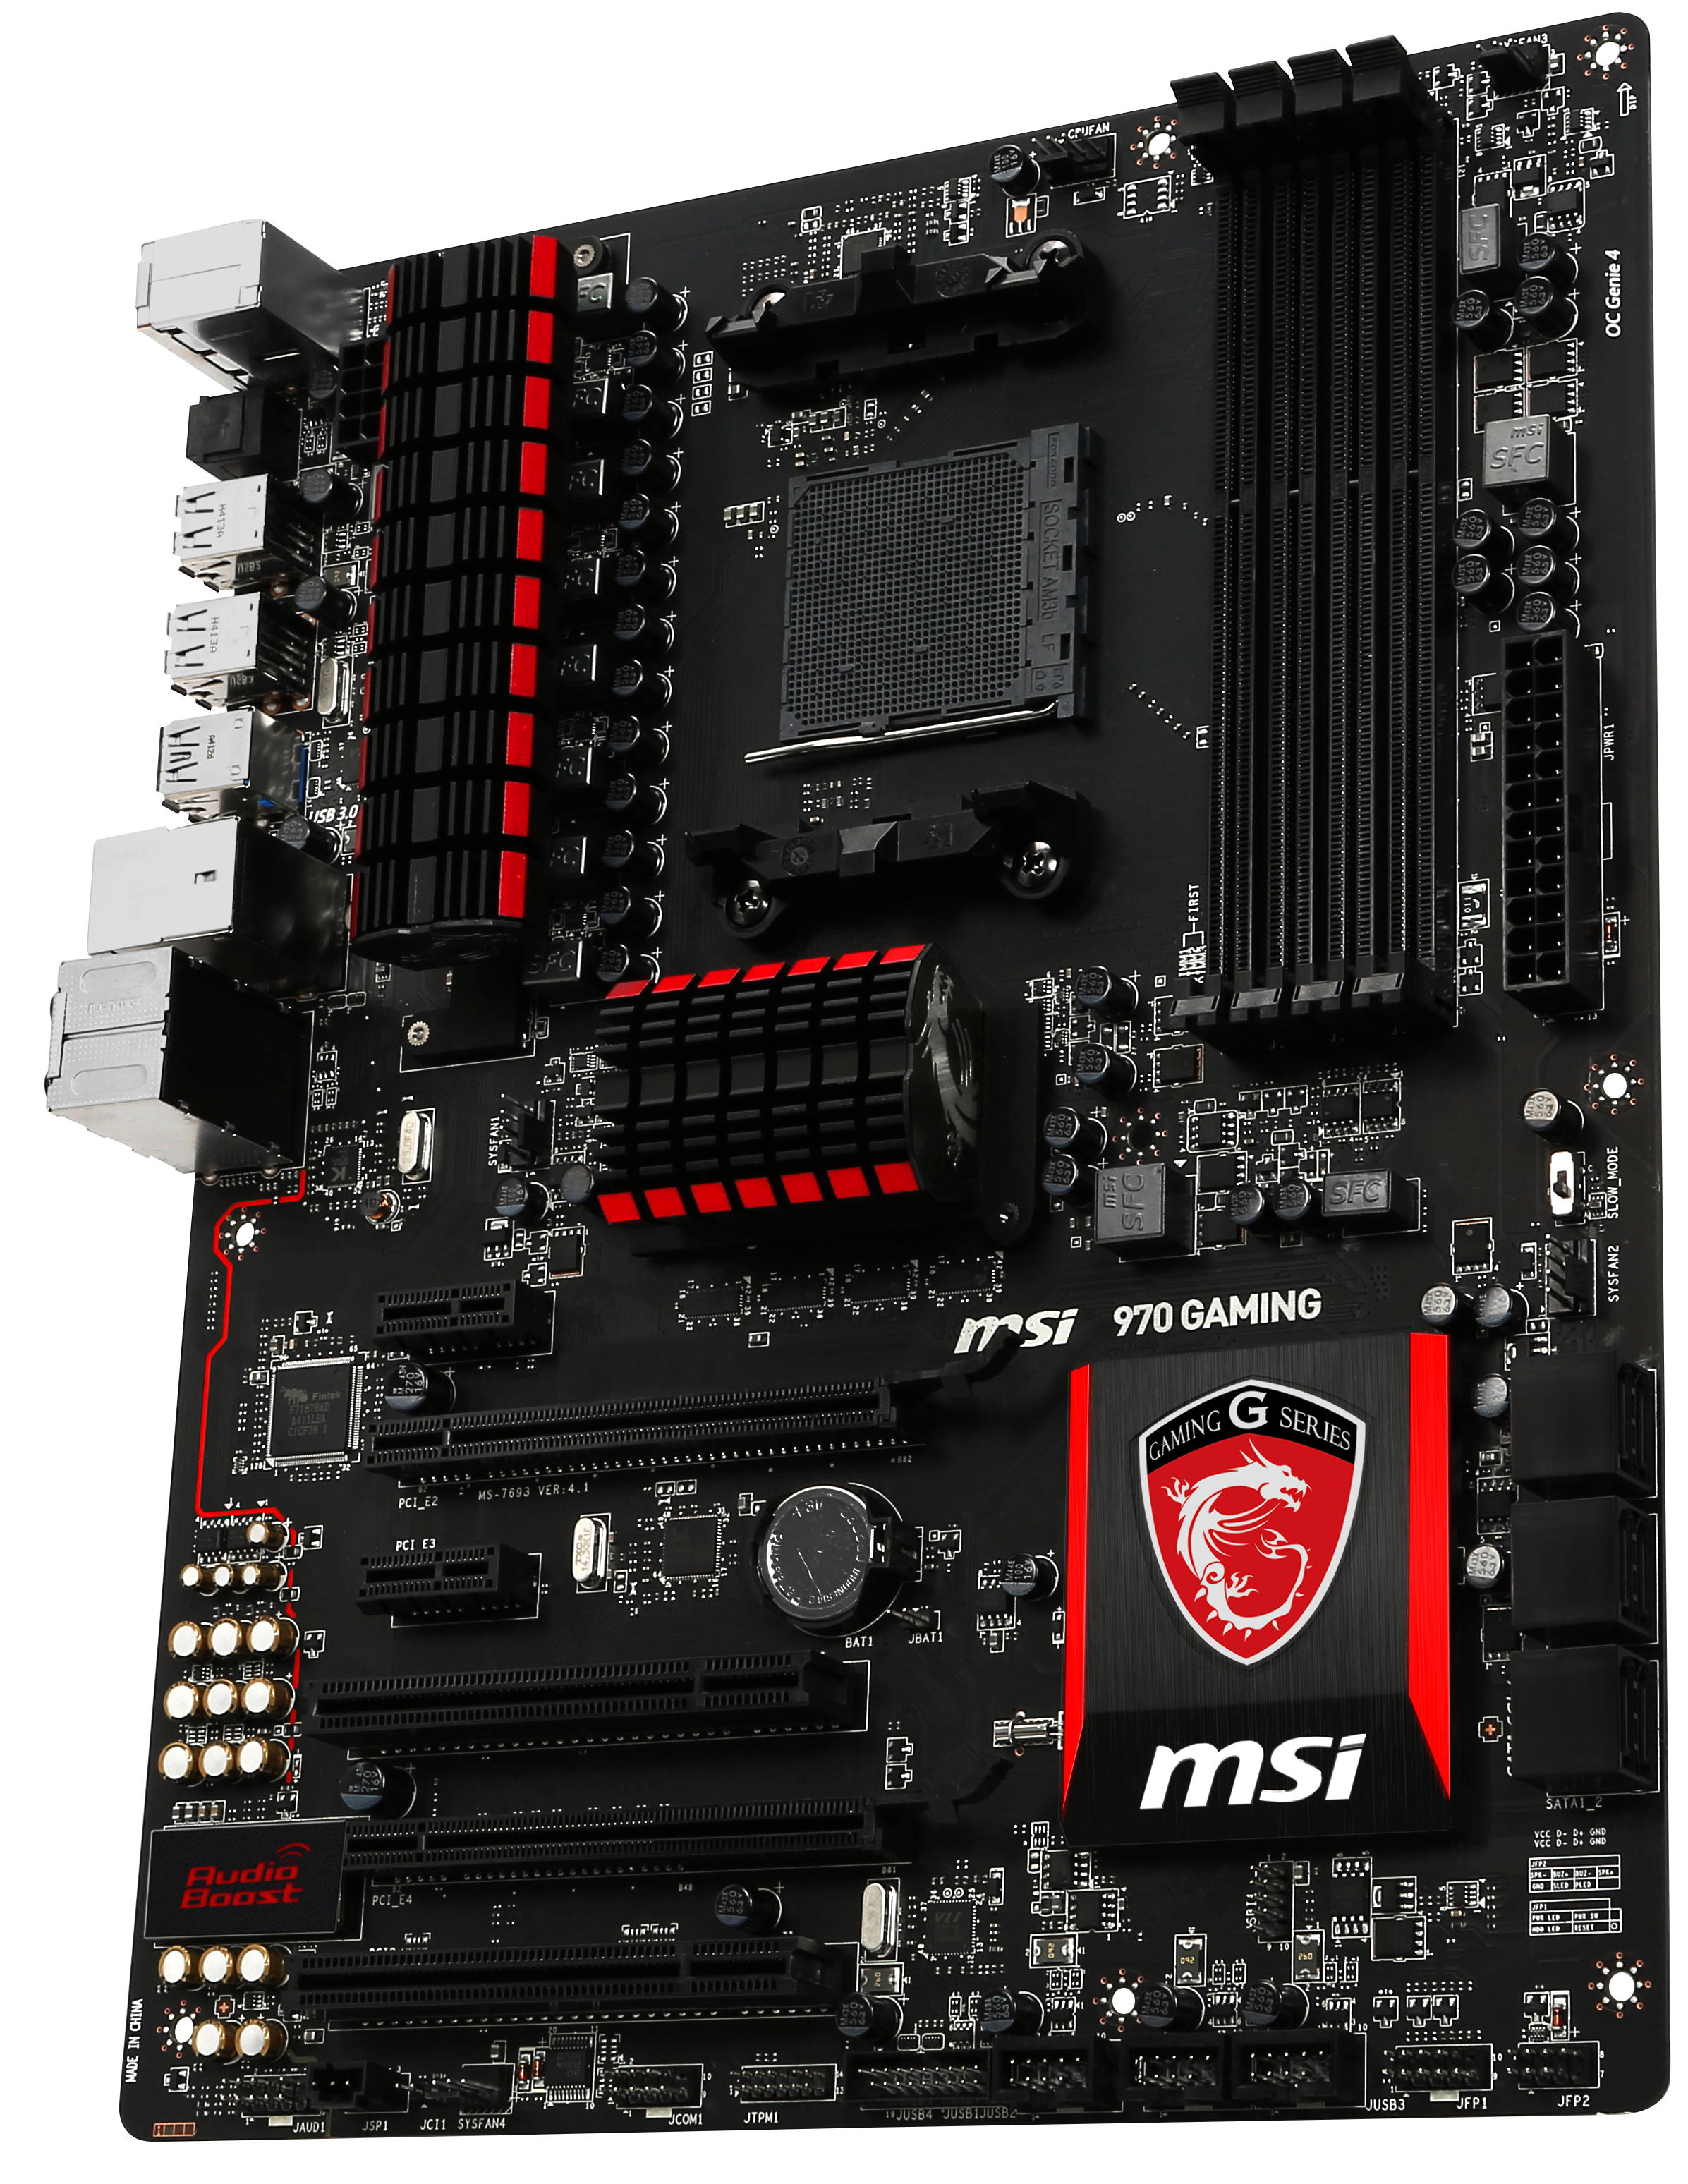 MSI 970 Gaming Motherboard Review: Undercutting AM3+ at $100